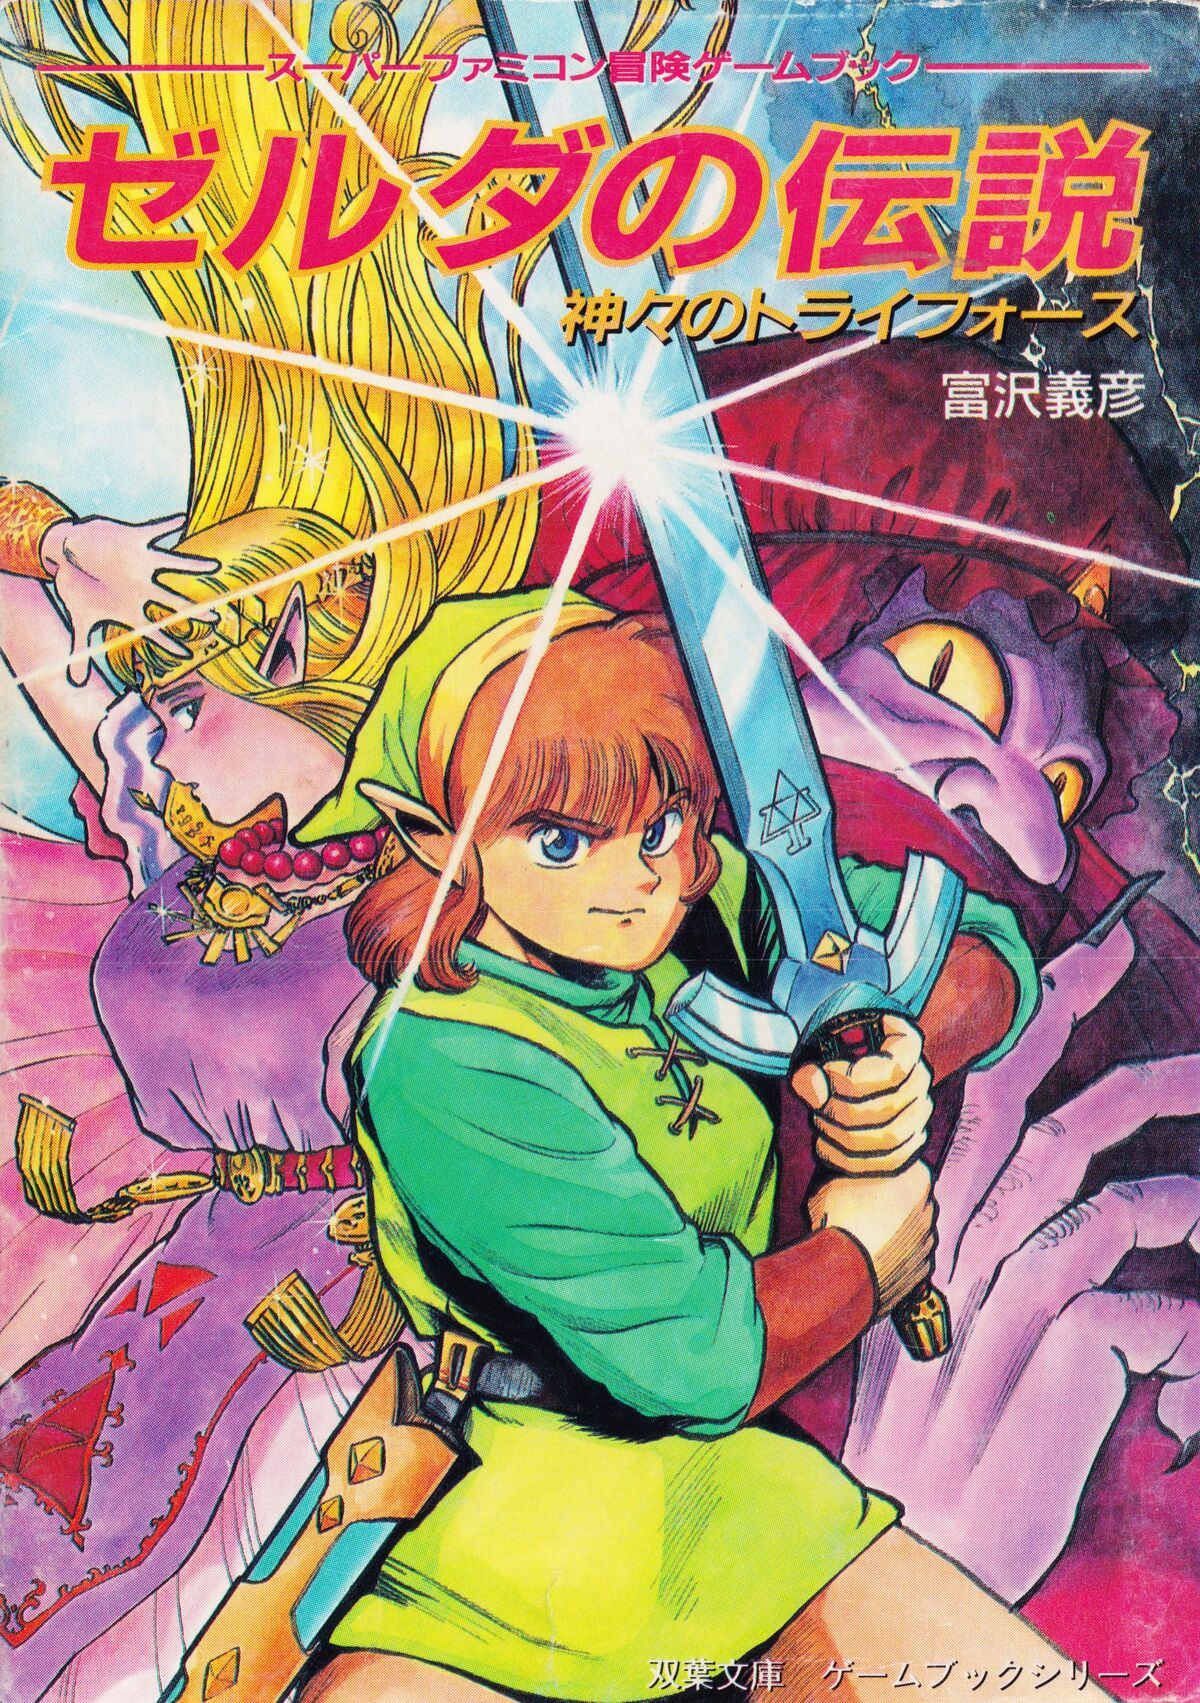 ALttP] Full scans (never online before!) of a 1992 Zelda: LttP novel by  Katsuyuki Ozaki for the Futabasha Fantasy Novel Series. The art in this one  is pretty wild & you're the